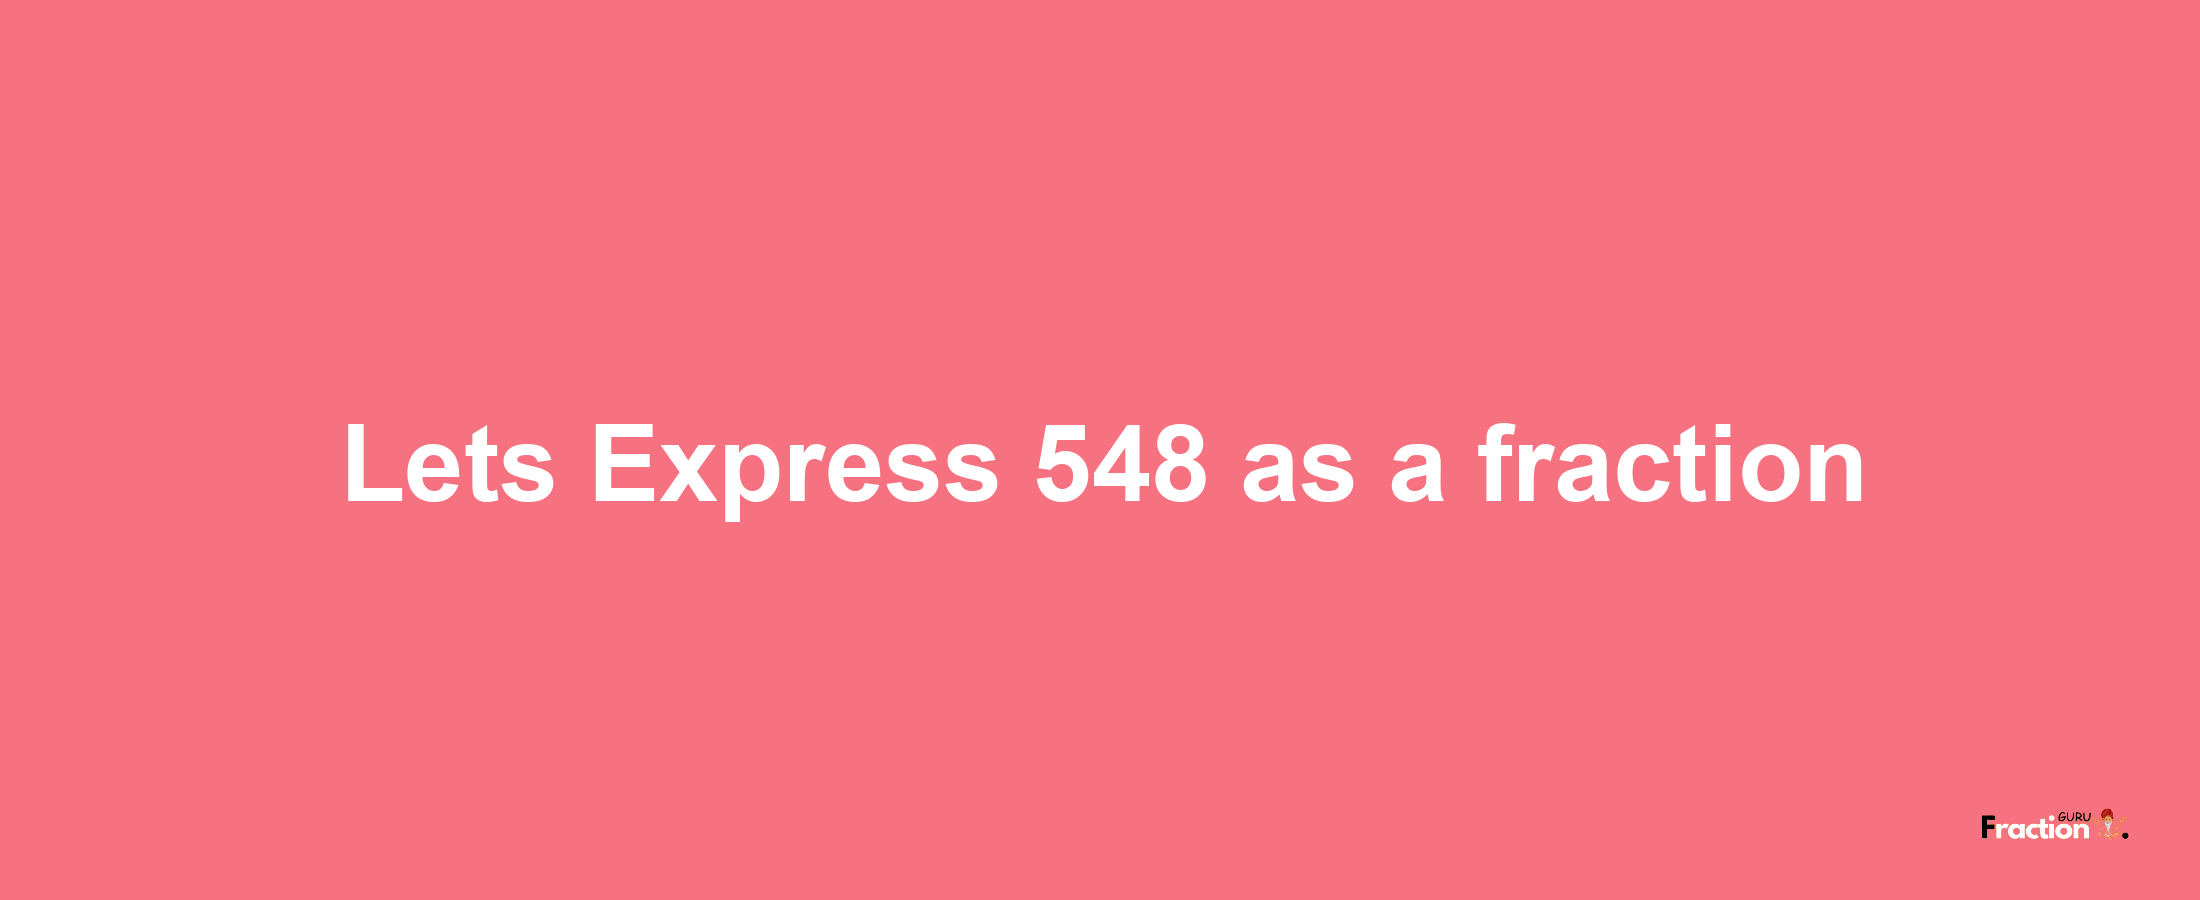 Lets Express 548 as afraction